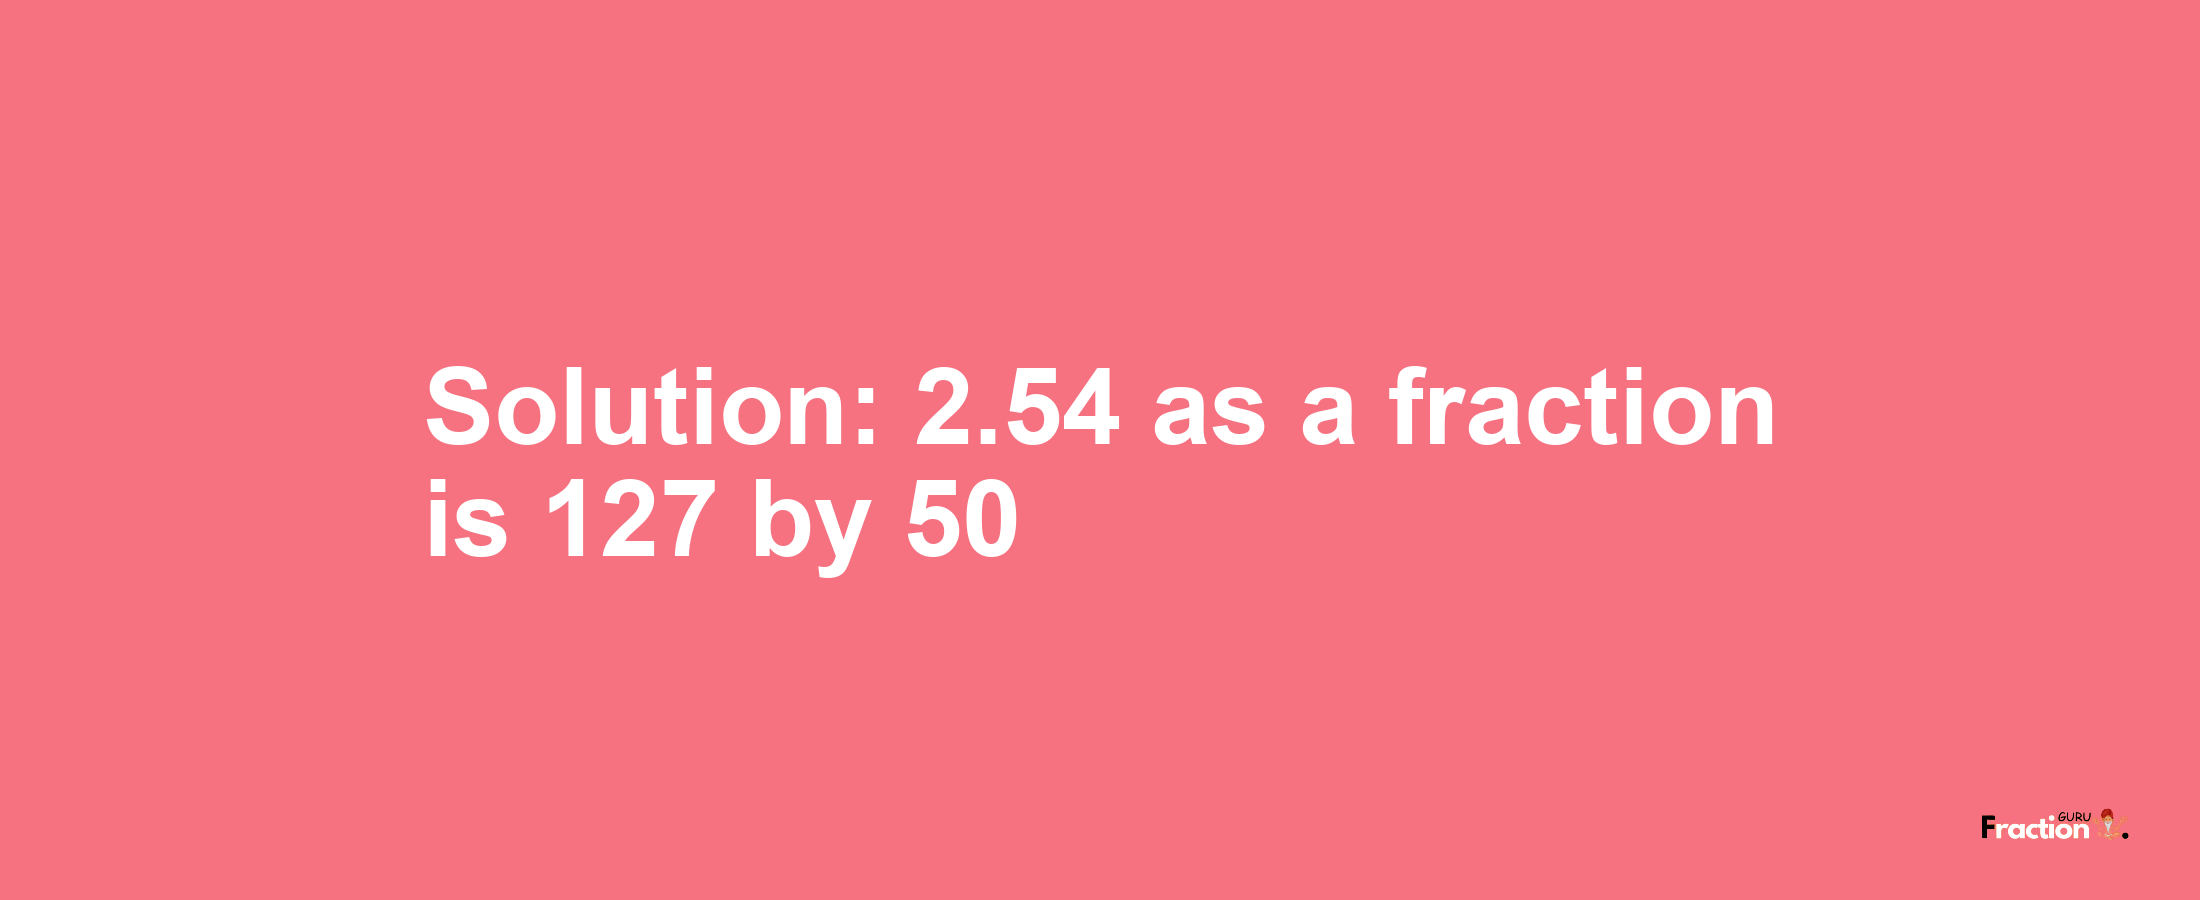 Solution:2.54 as a fraction is 127/50